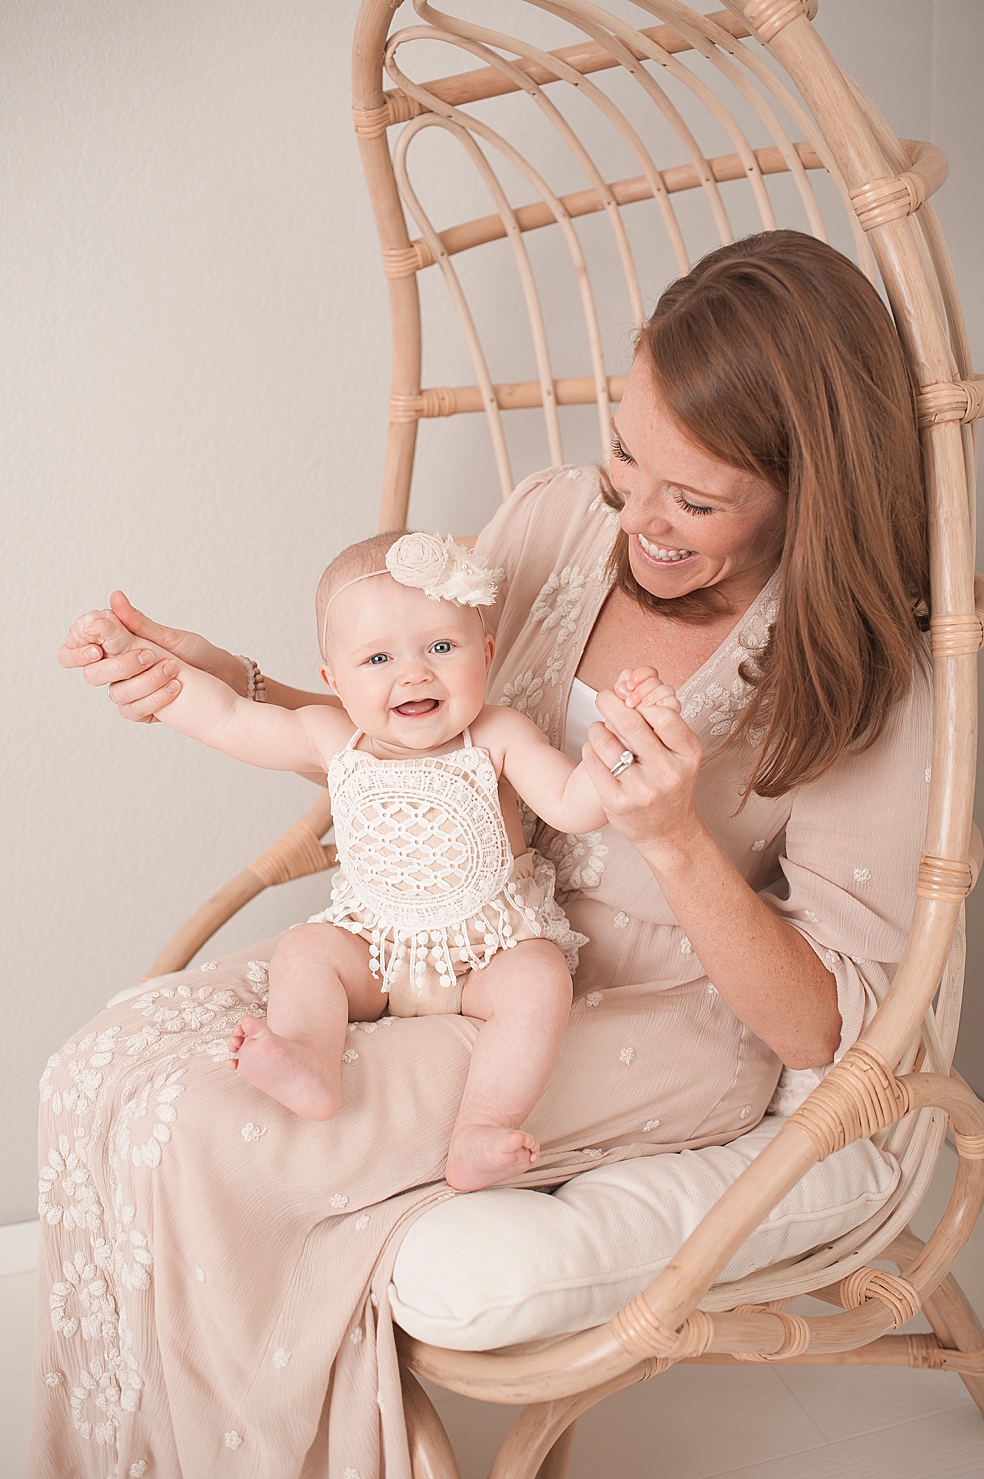 Mom wearing soft pink dress holding her baby girl | Photo by Jessica Lee Photography